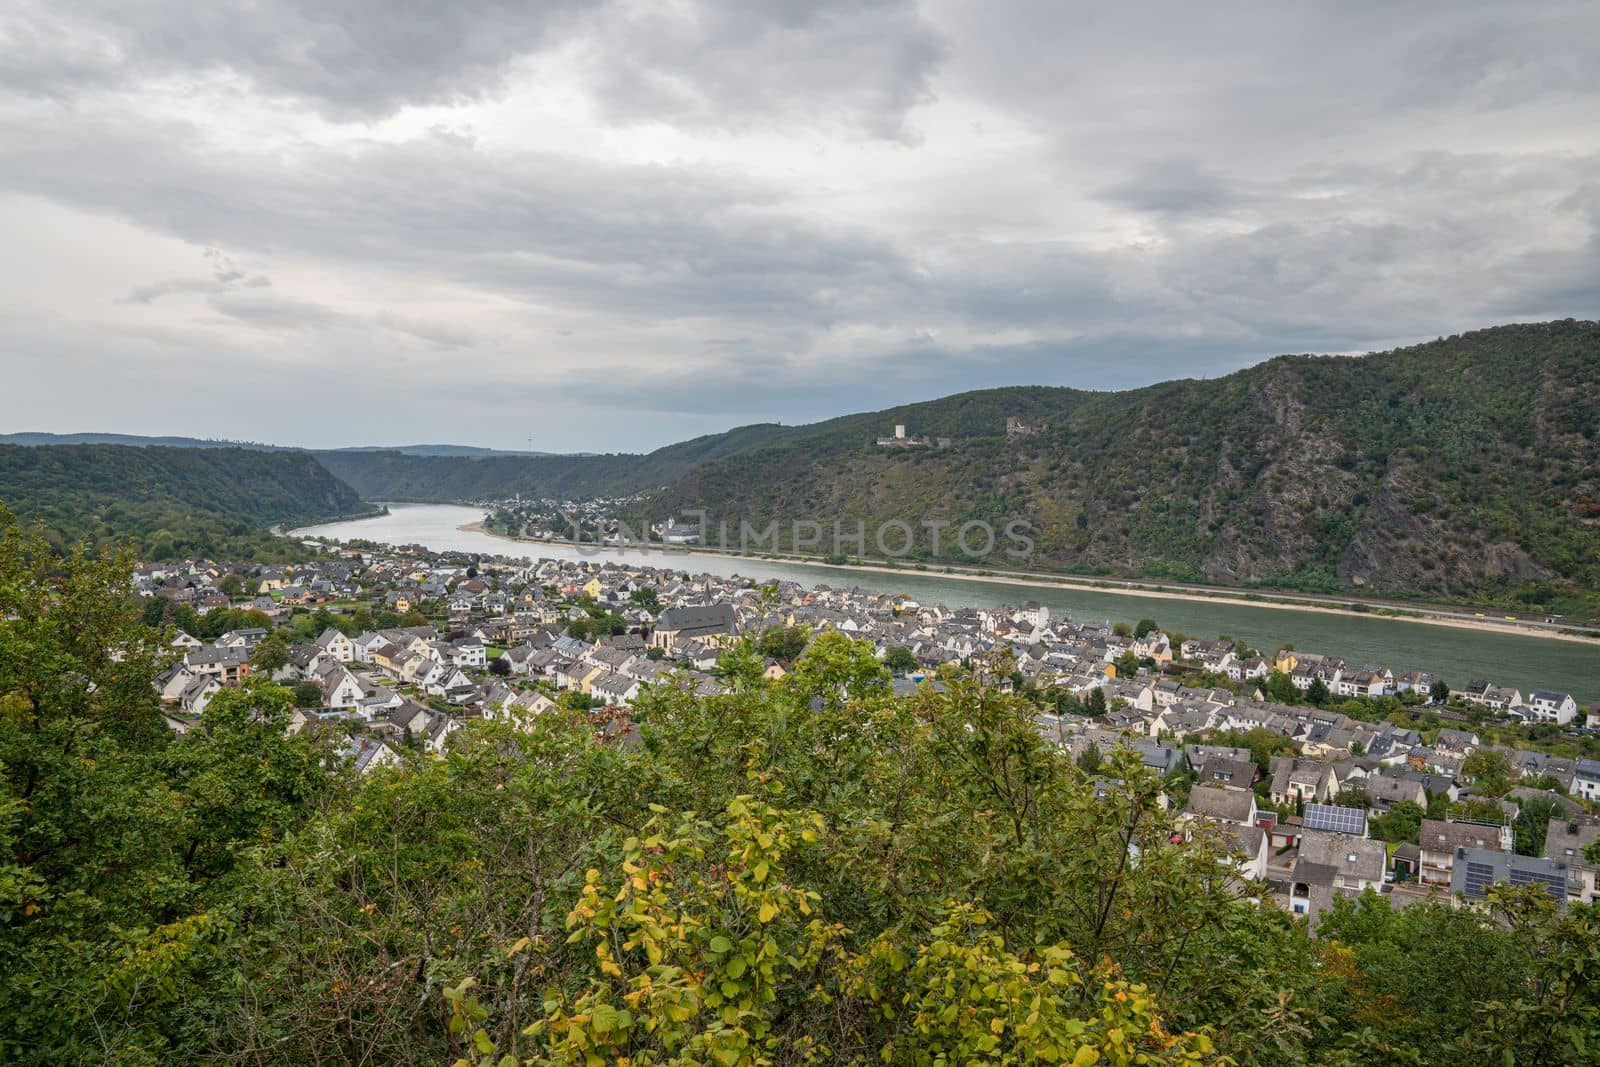 Panoramic image of Boppard close to the Rhine river, Rhine valley, Germany